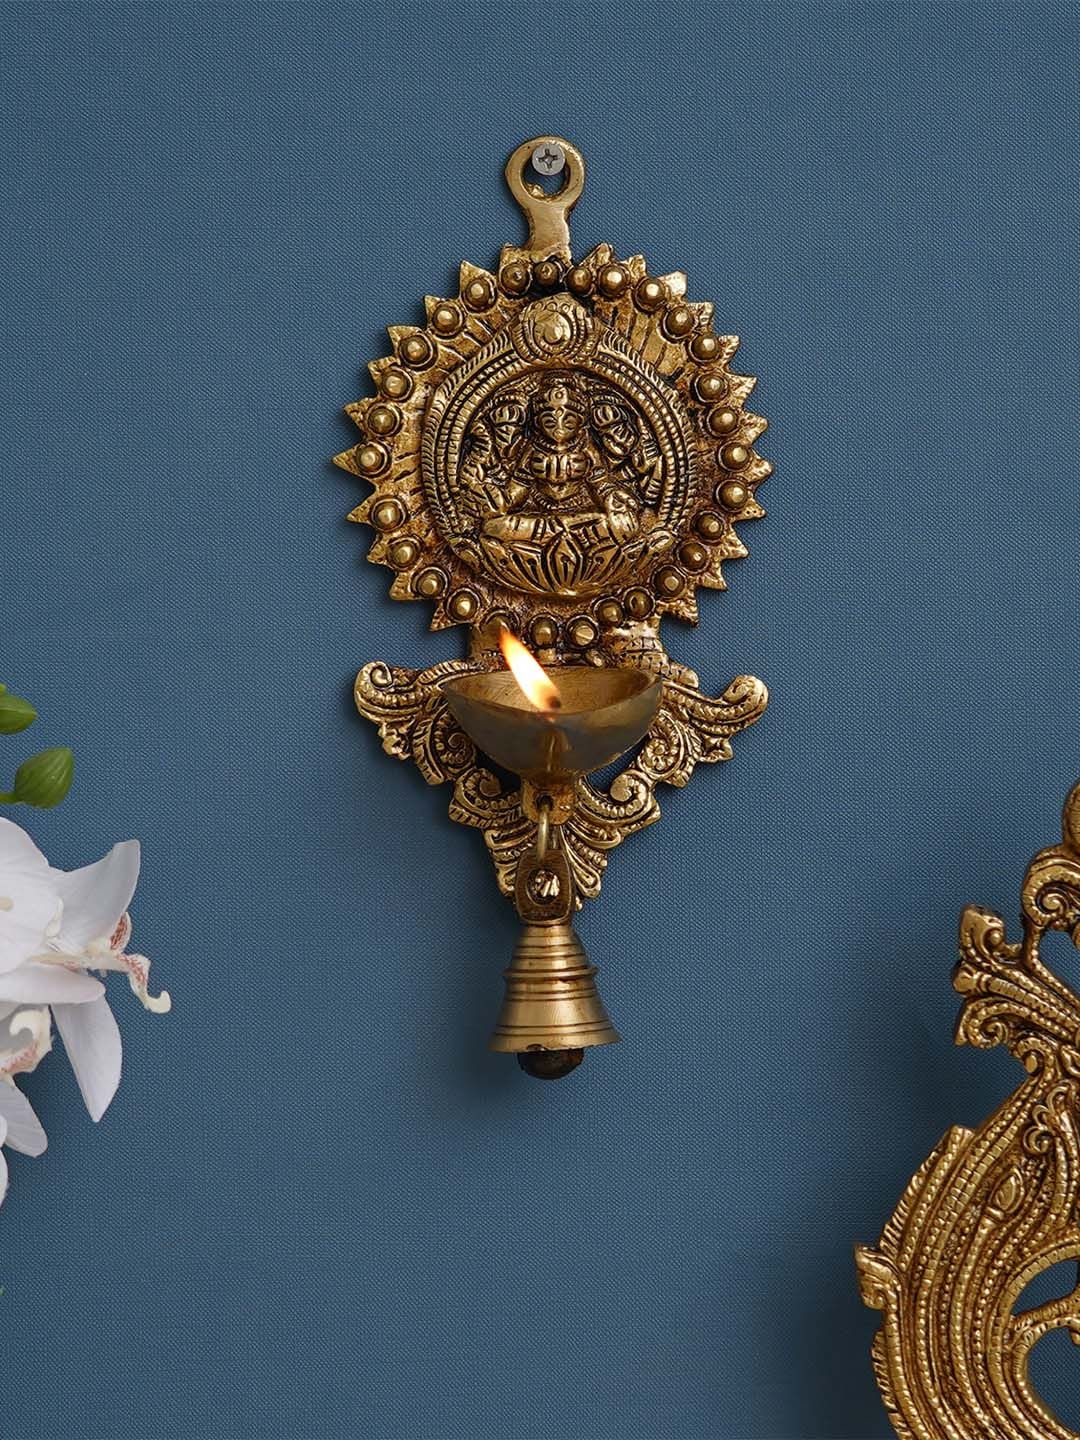 ECraftIndia Golden Decorative Handcrafted Brass Wall Hanging Diya with Bell Wall Decor Price in India